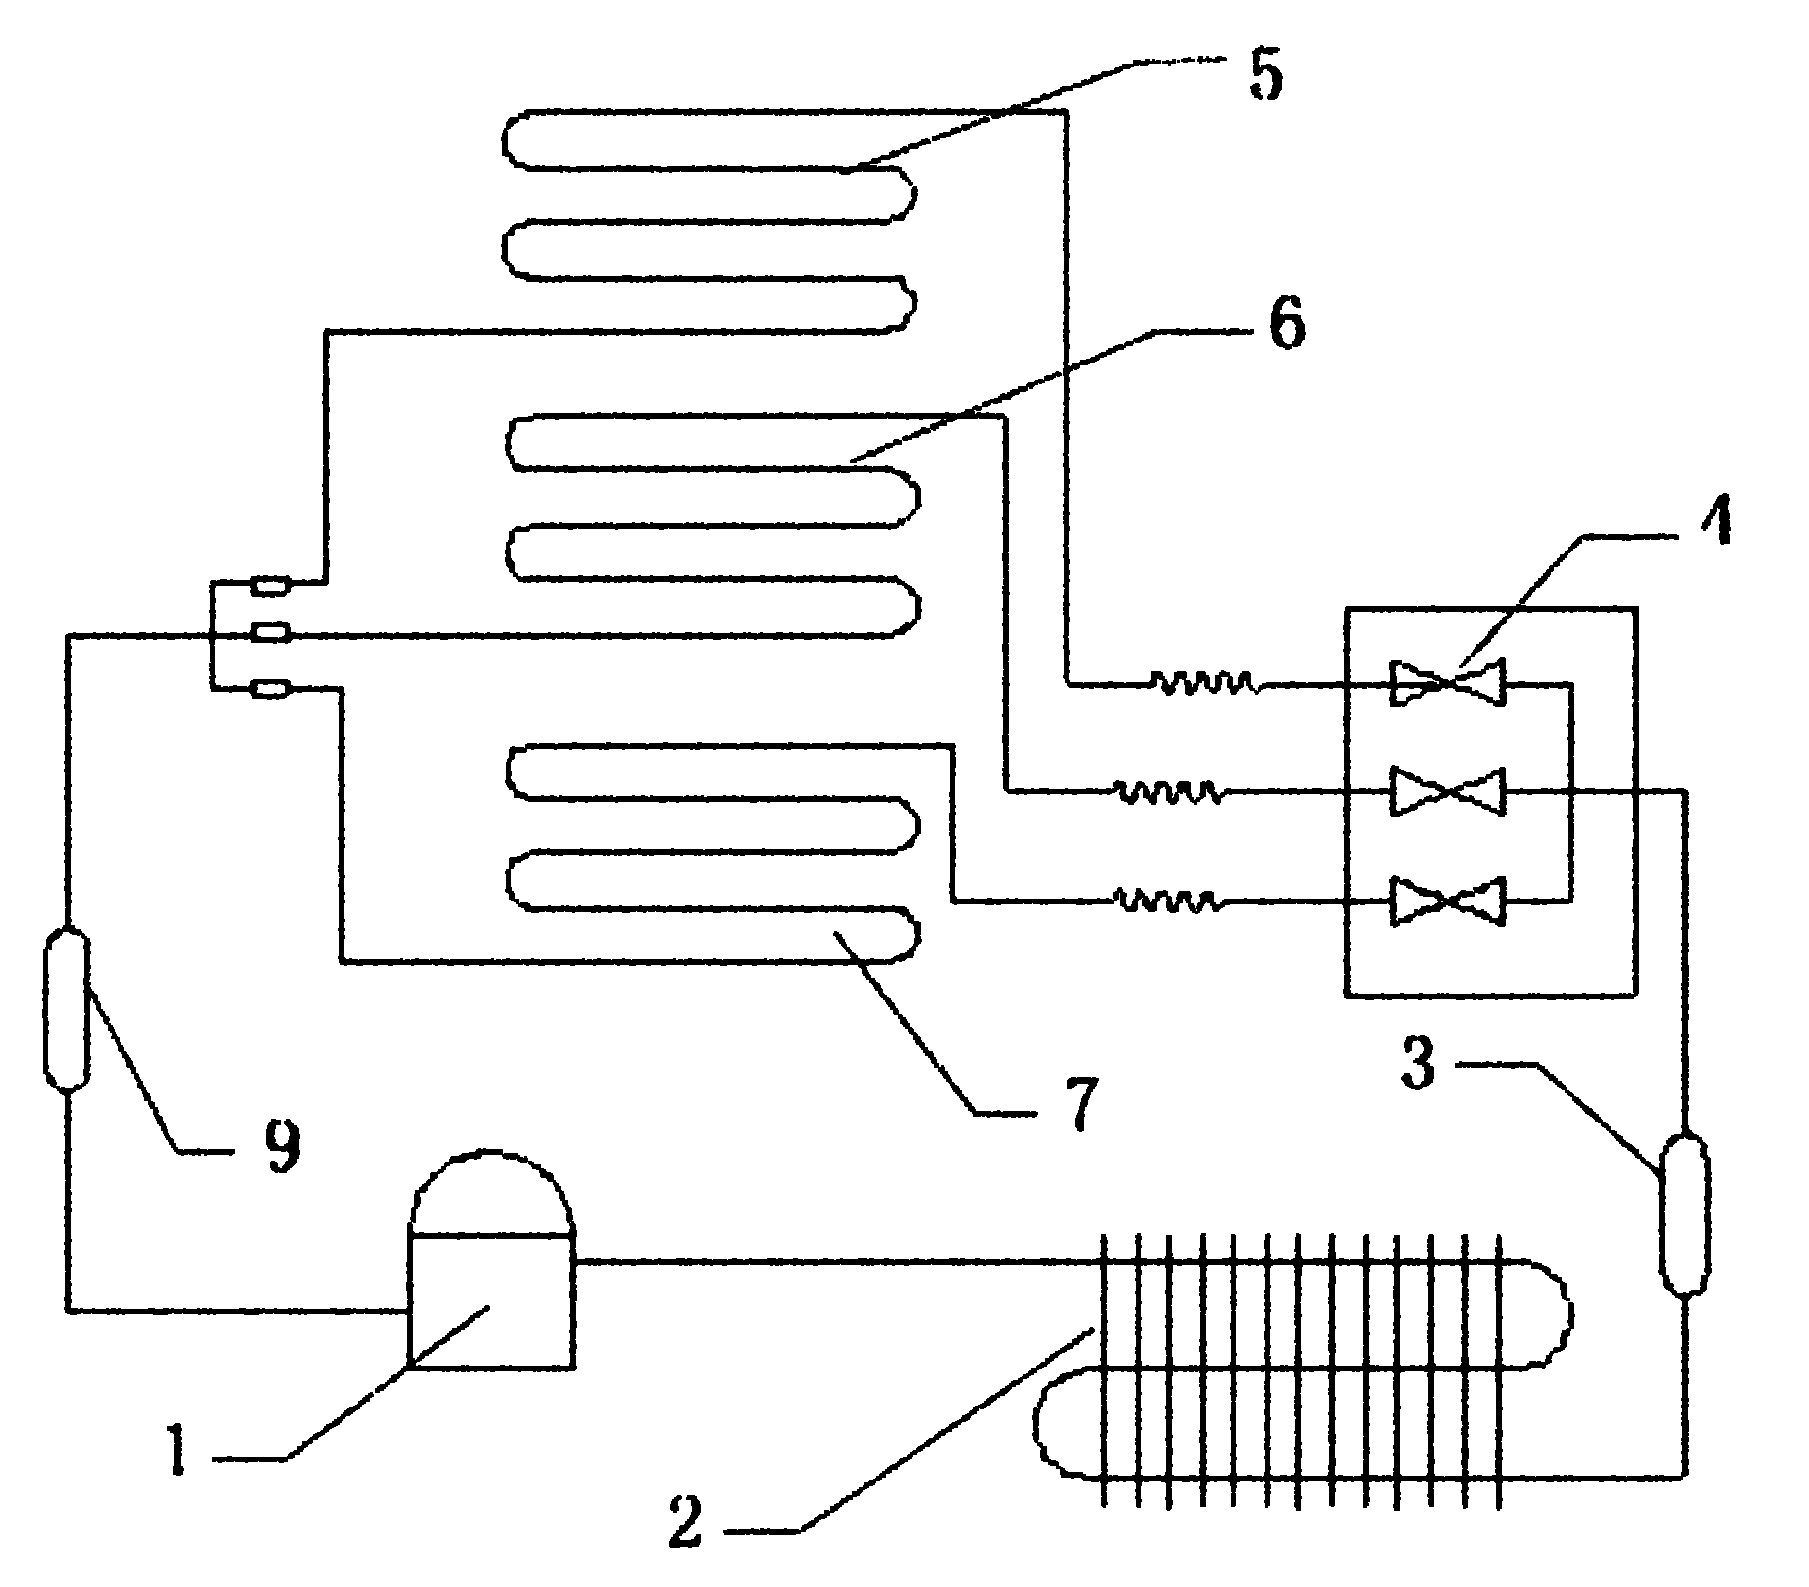 Refrigerator with variable freezing capacity